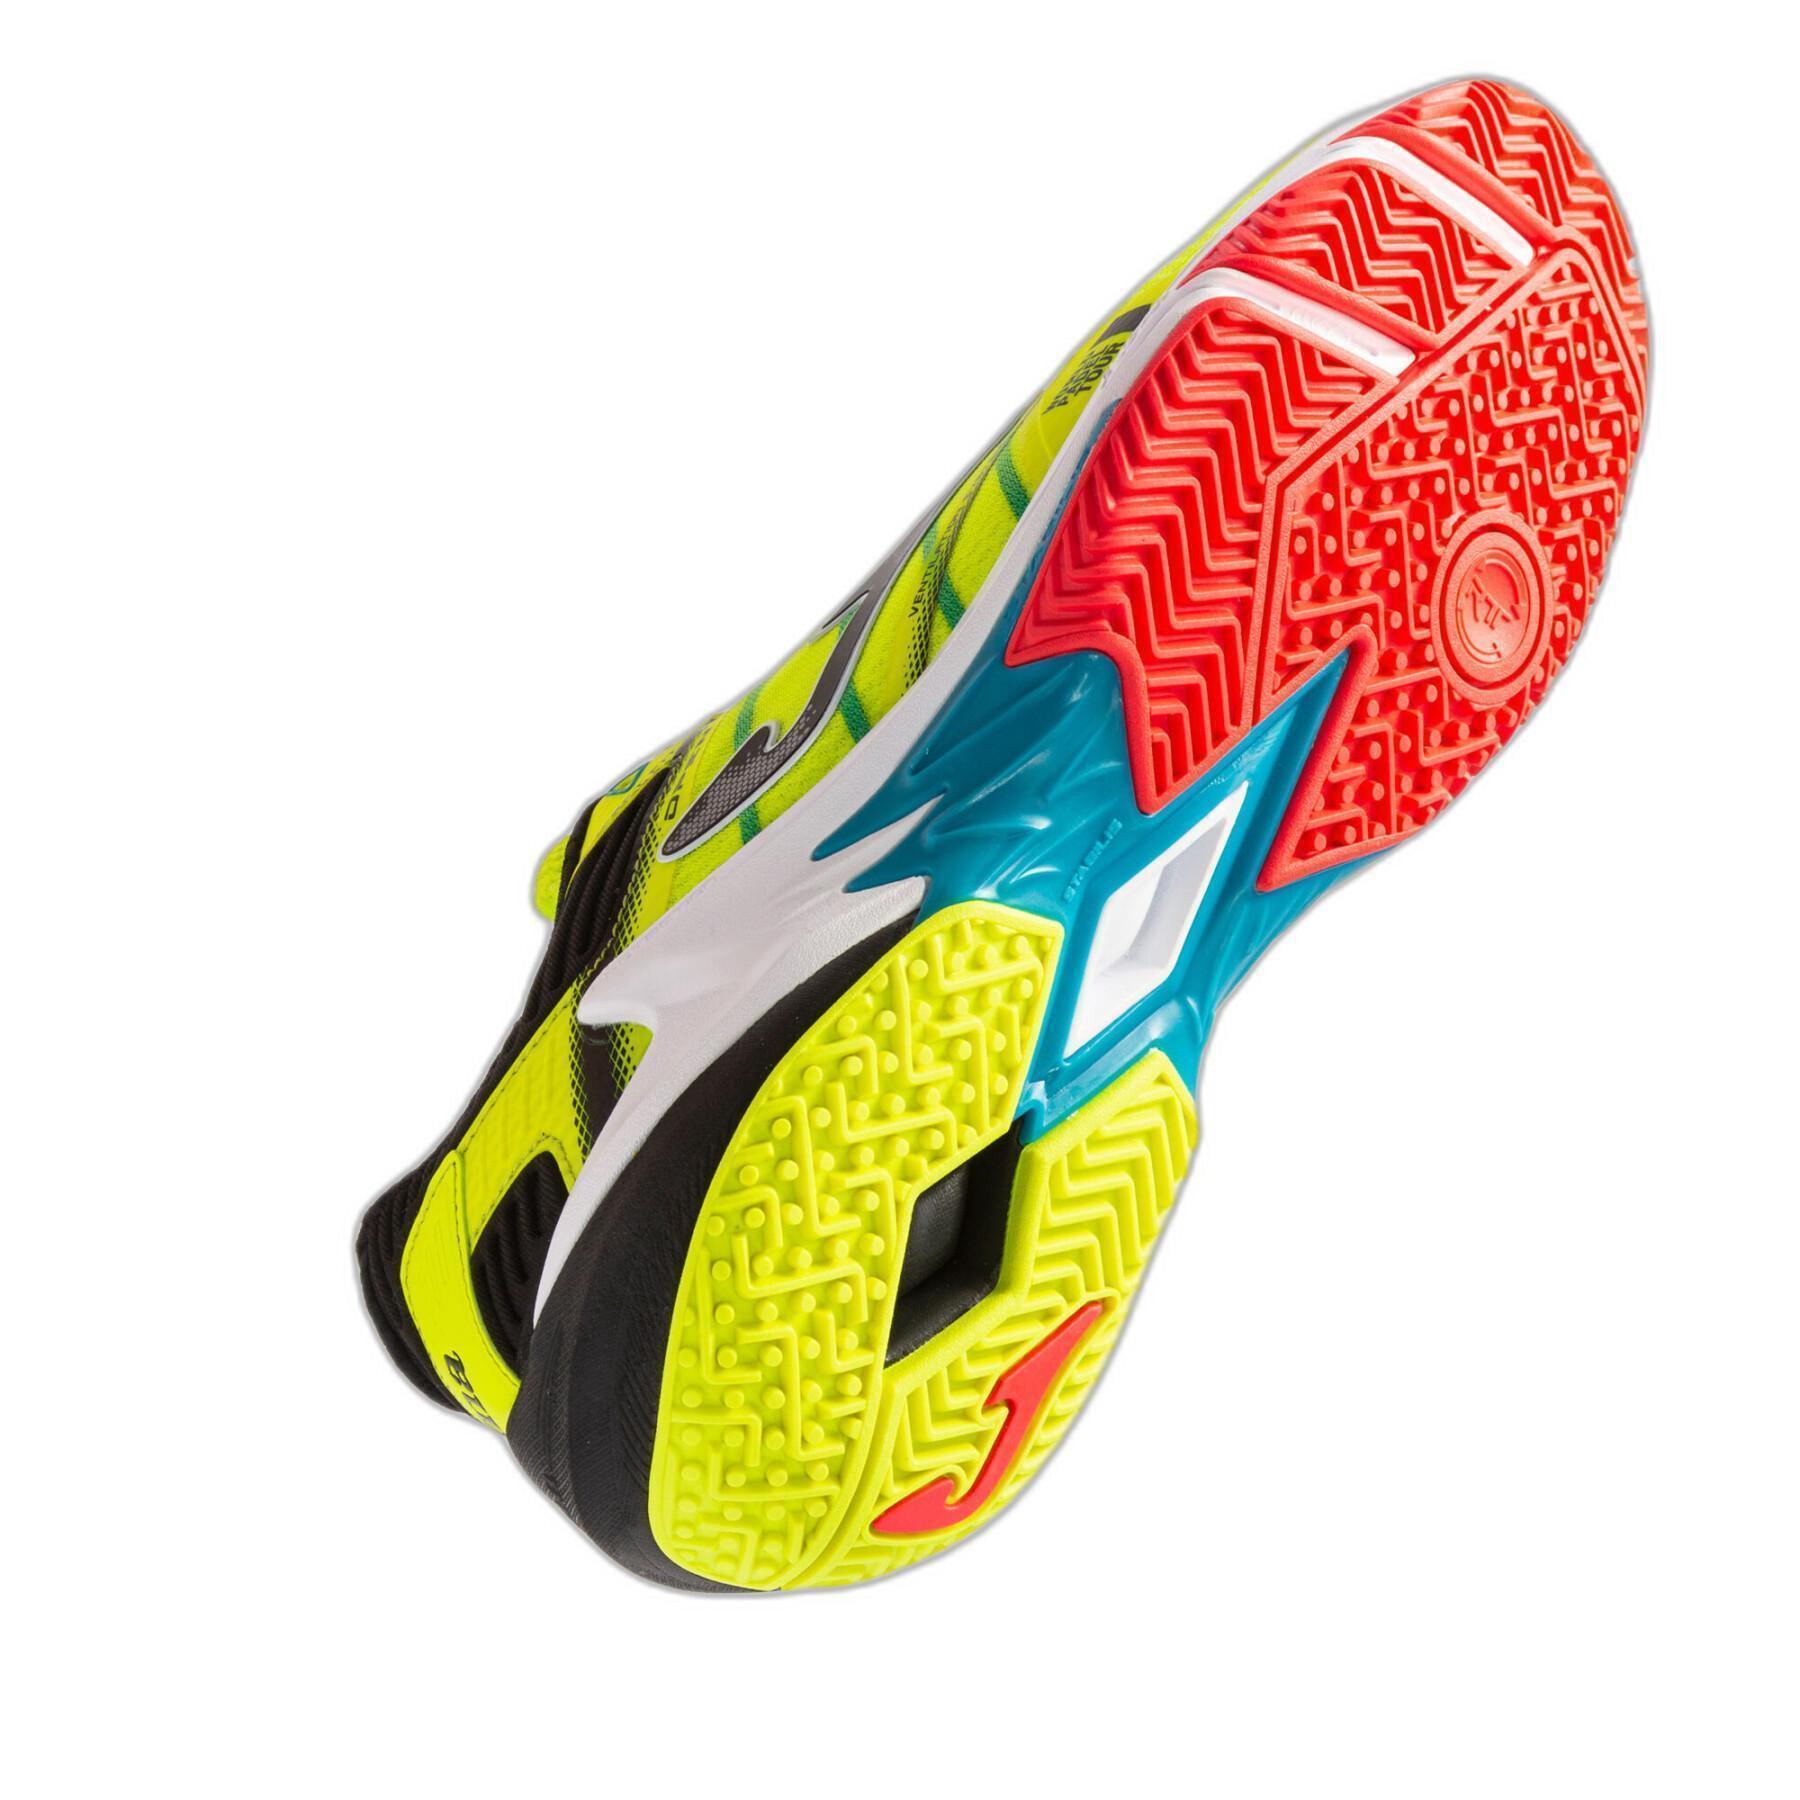 Padel shoes Joma T.Open